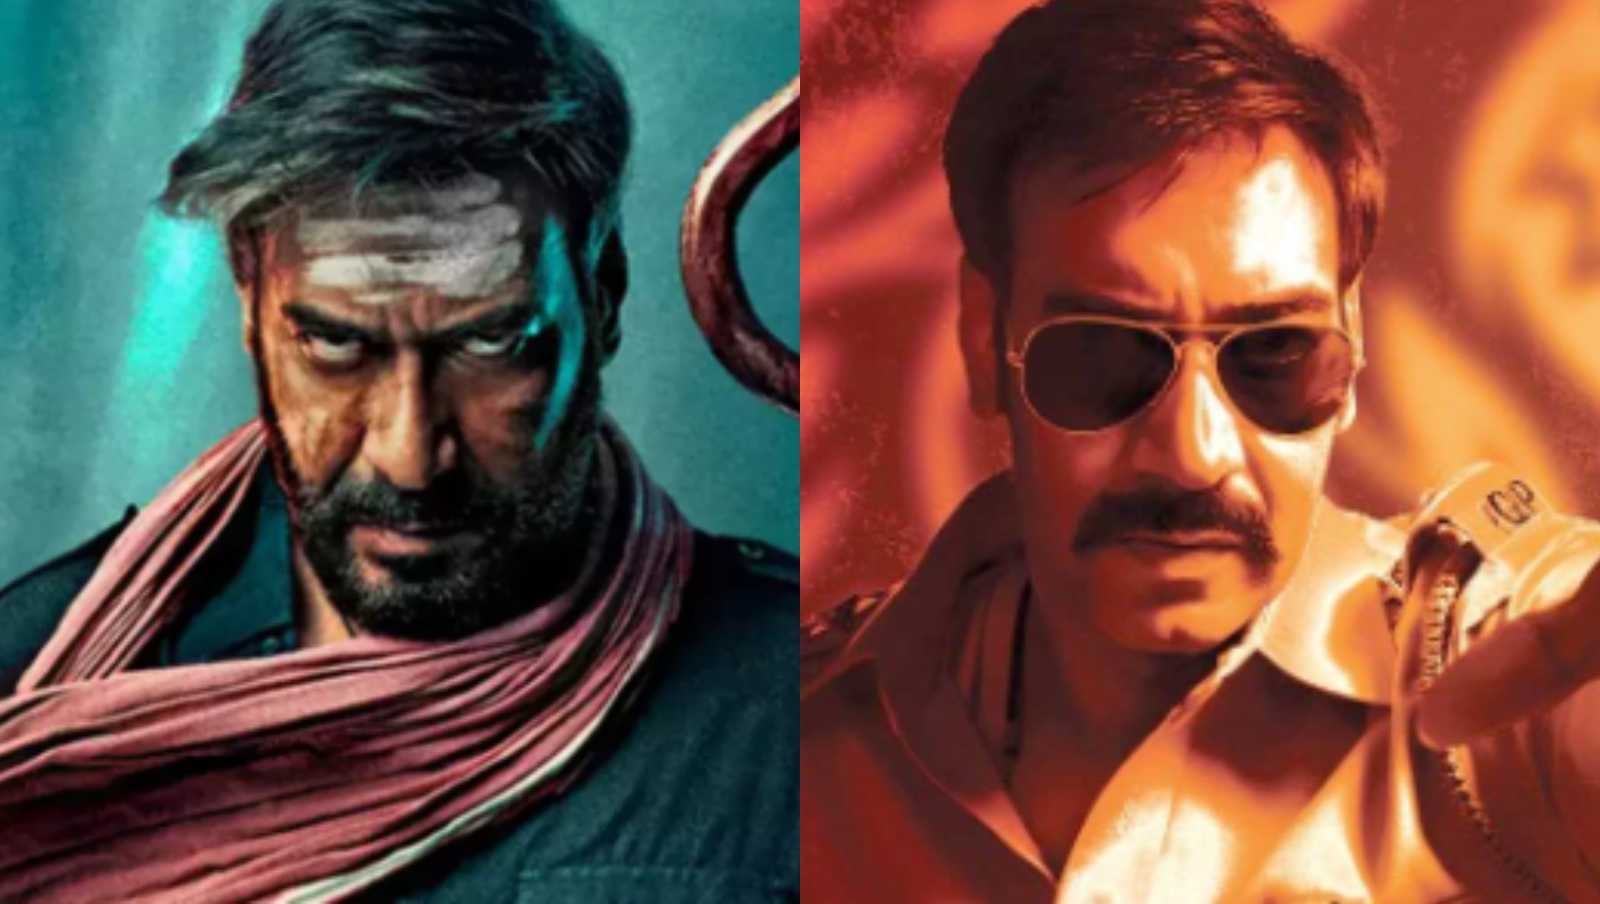 Bholaa, Singham: These South remakes played a crucial role in Ajay Devgn's superstardom